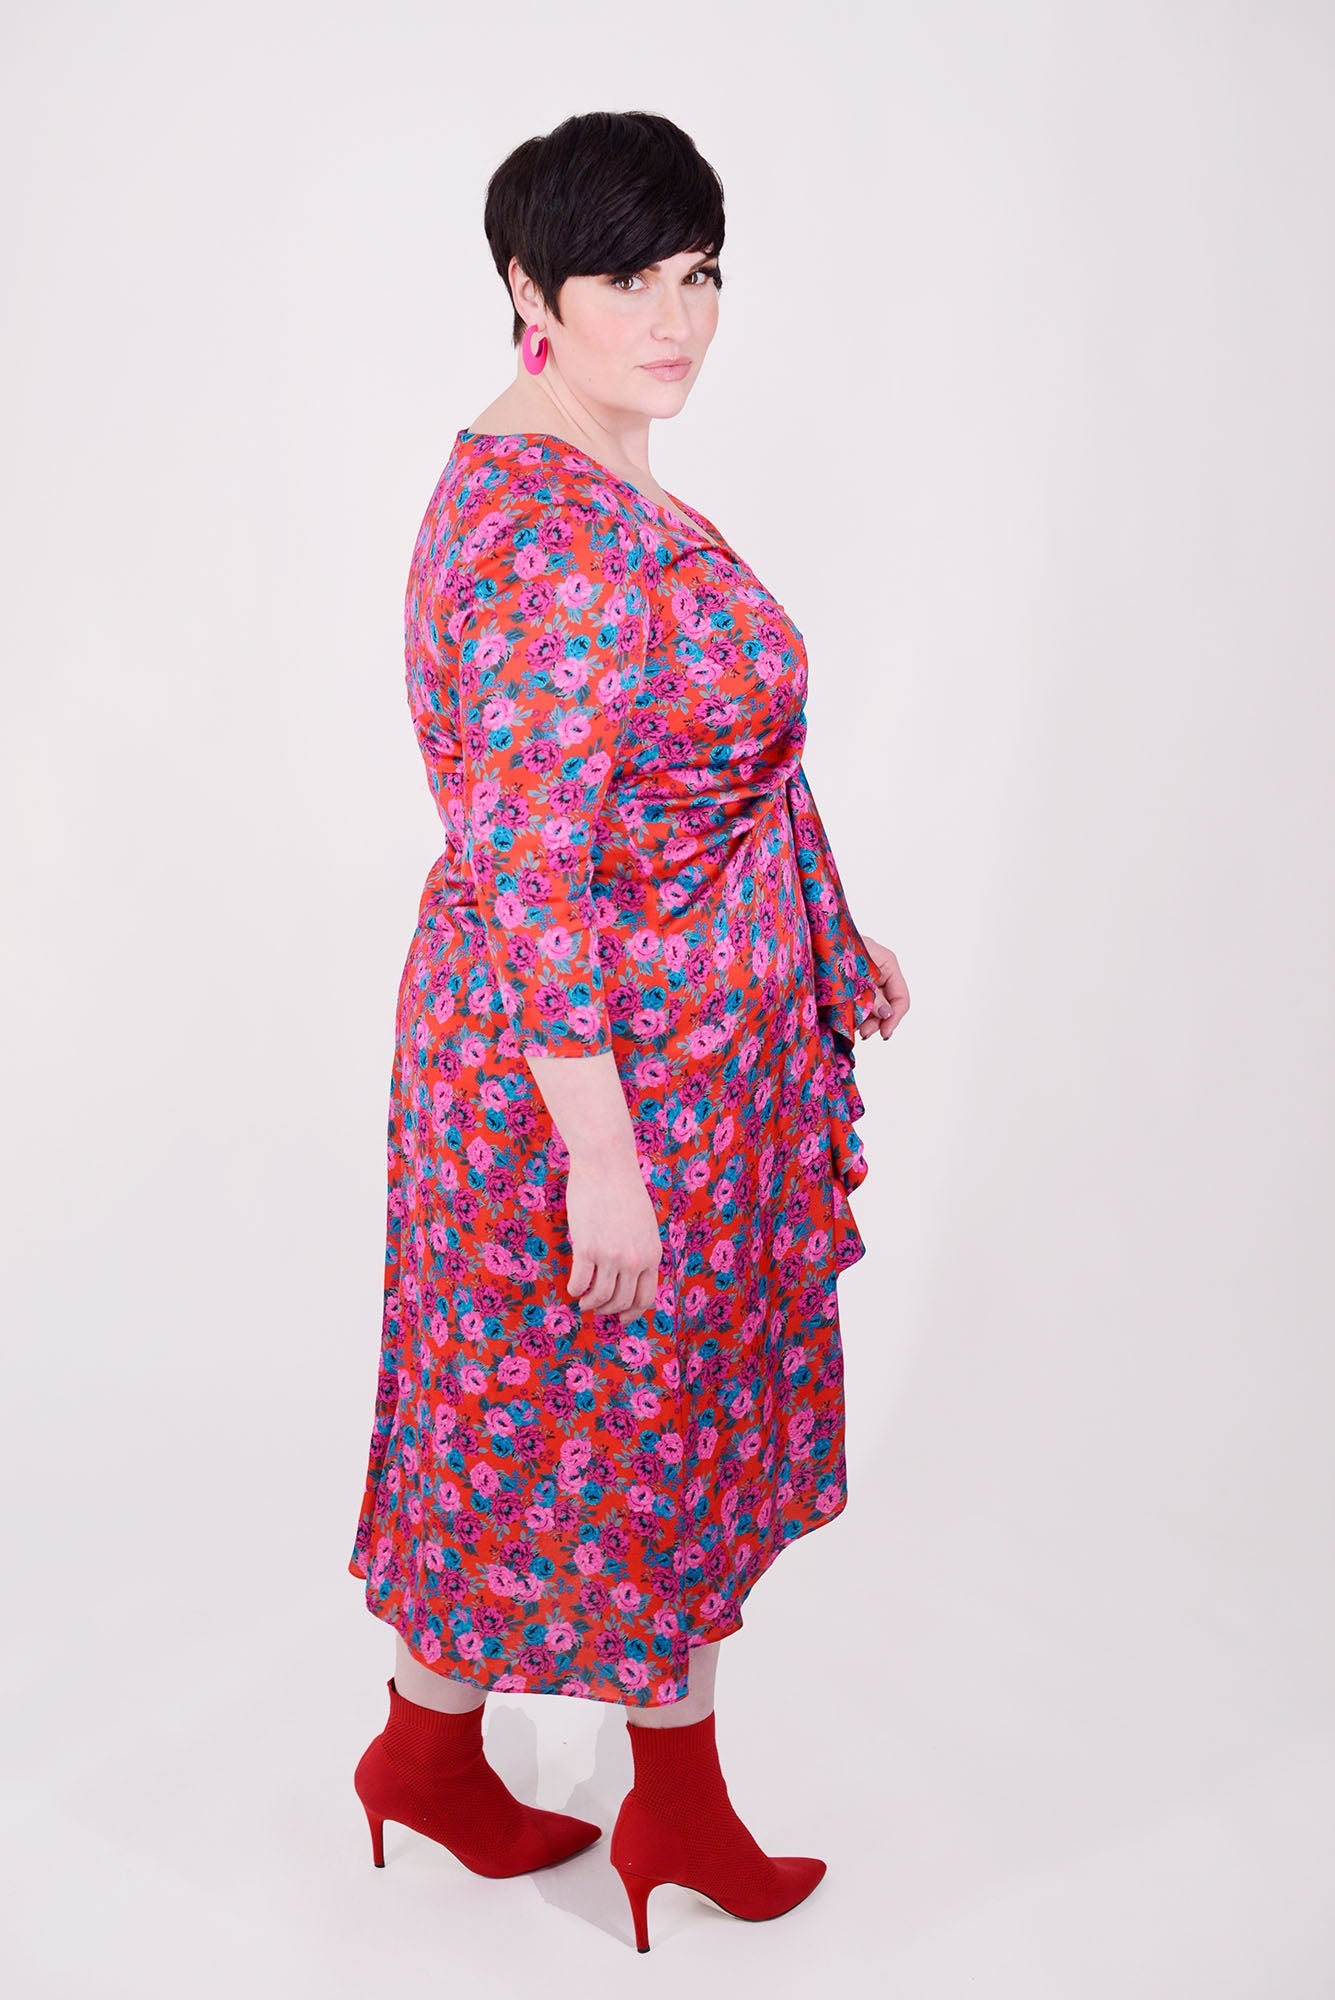 Mayes NYC Winnie RNR Dress in Red colored Mini Rose Print  worn by model Max